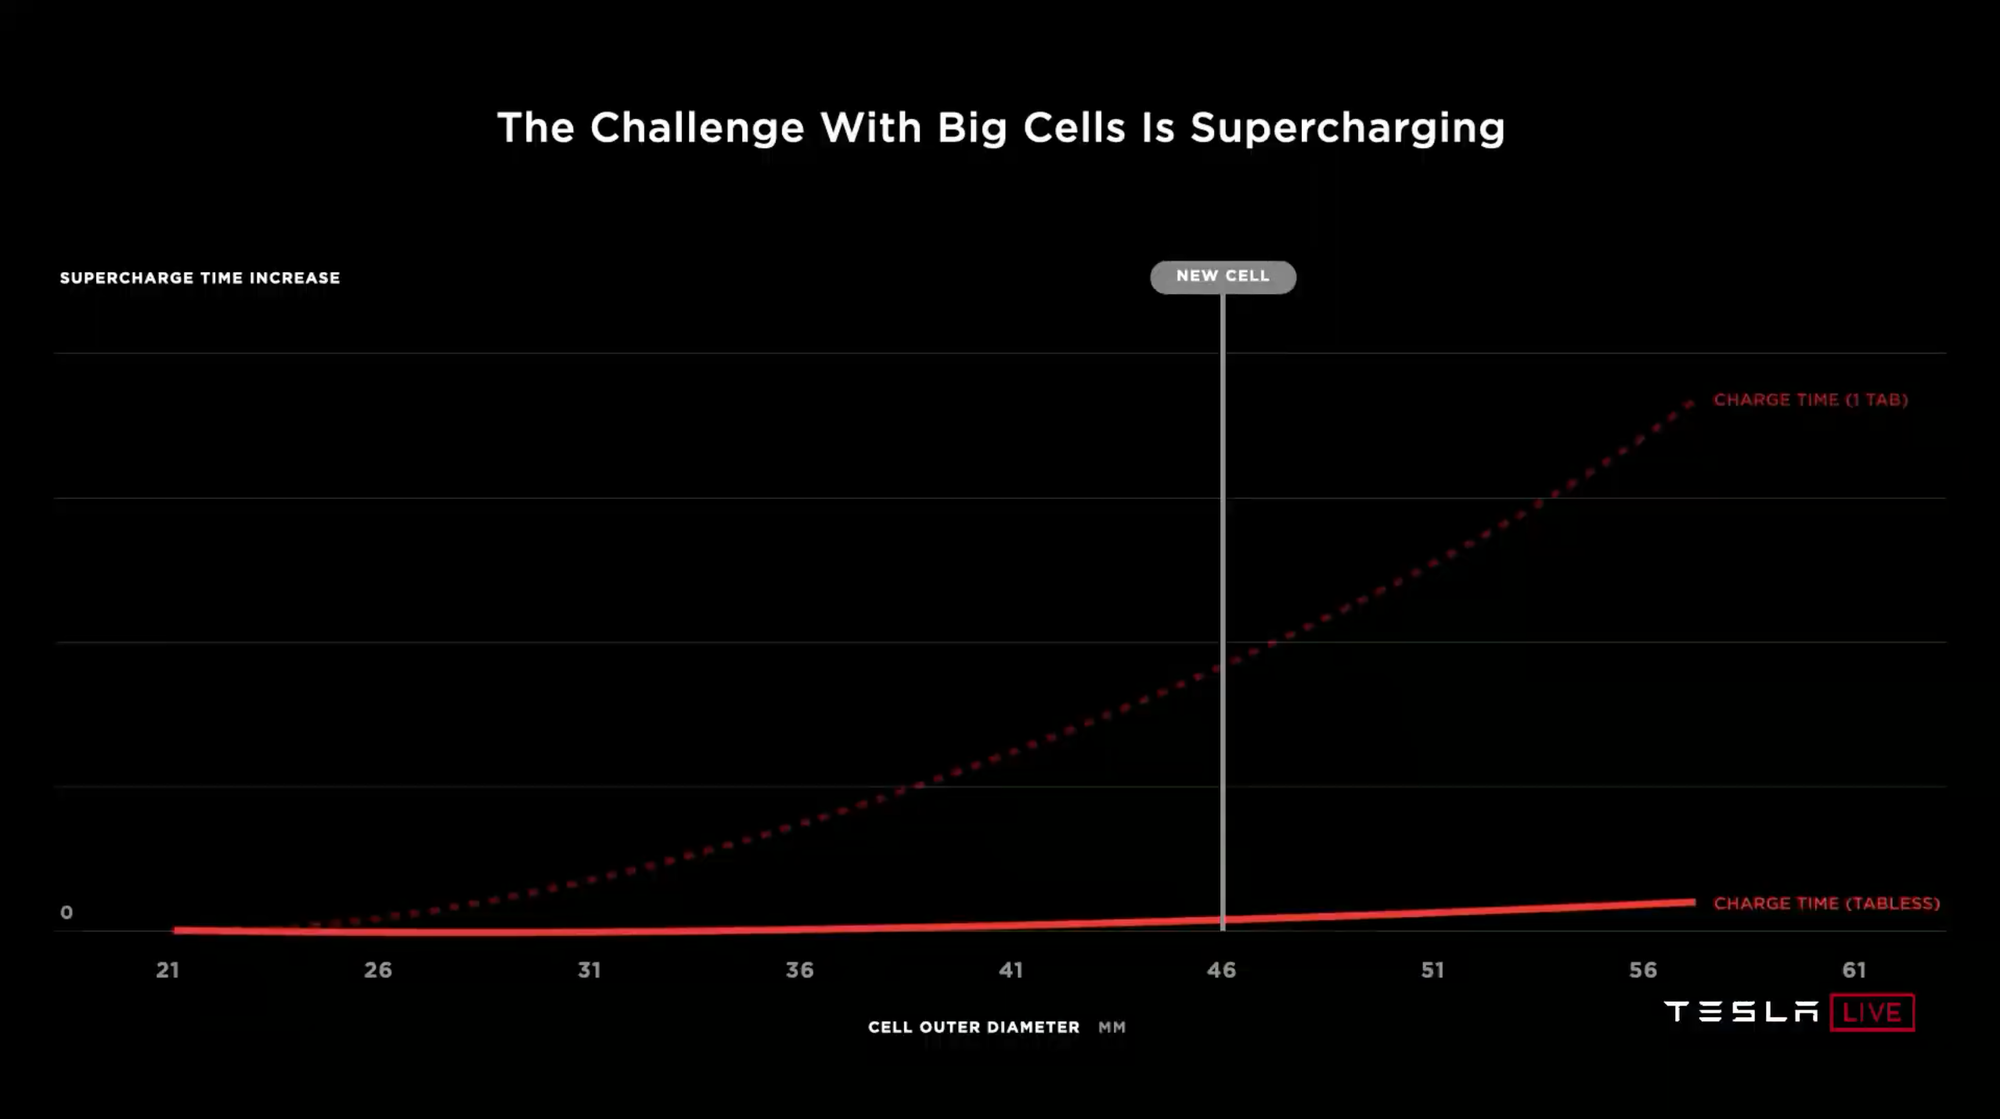 2020.09-tesla-battery-day-elon-musk-drew-baglino-4680-cell-jelly-roll-supercharging-thermal.png